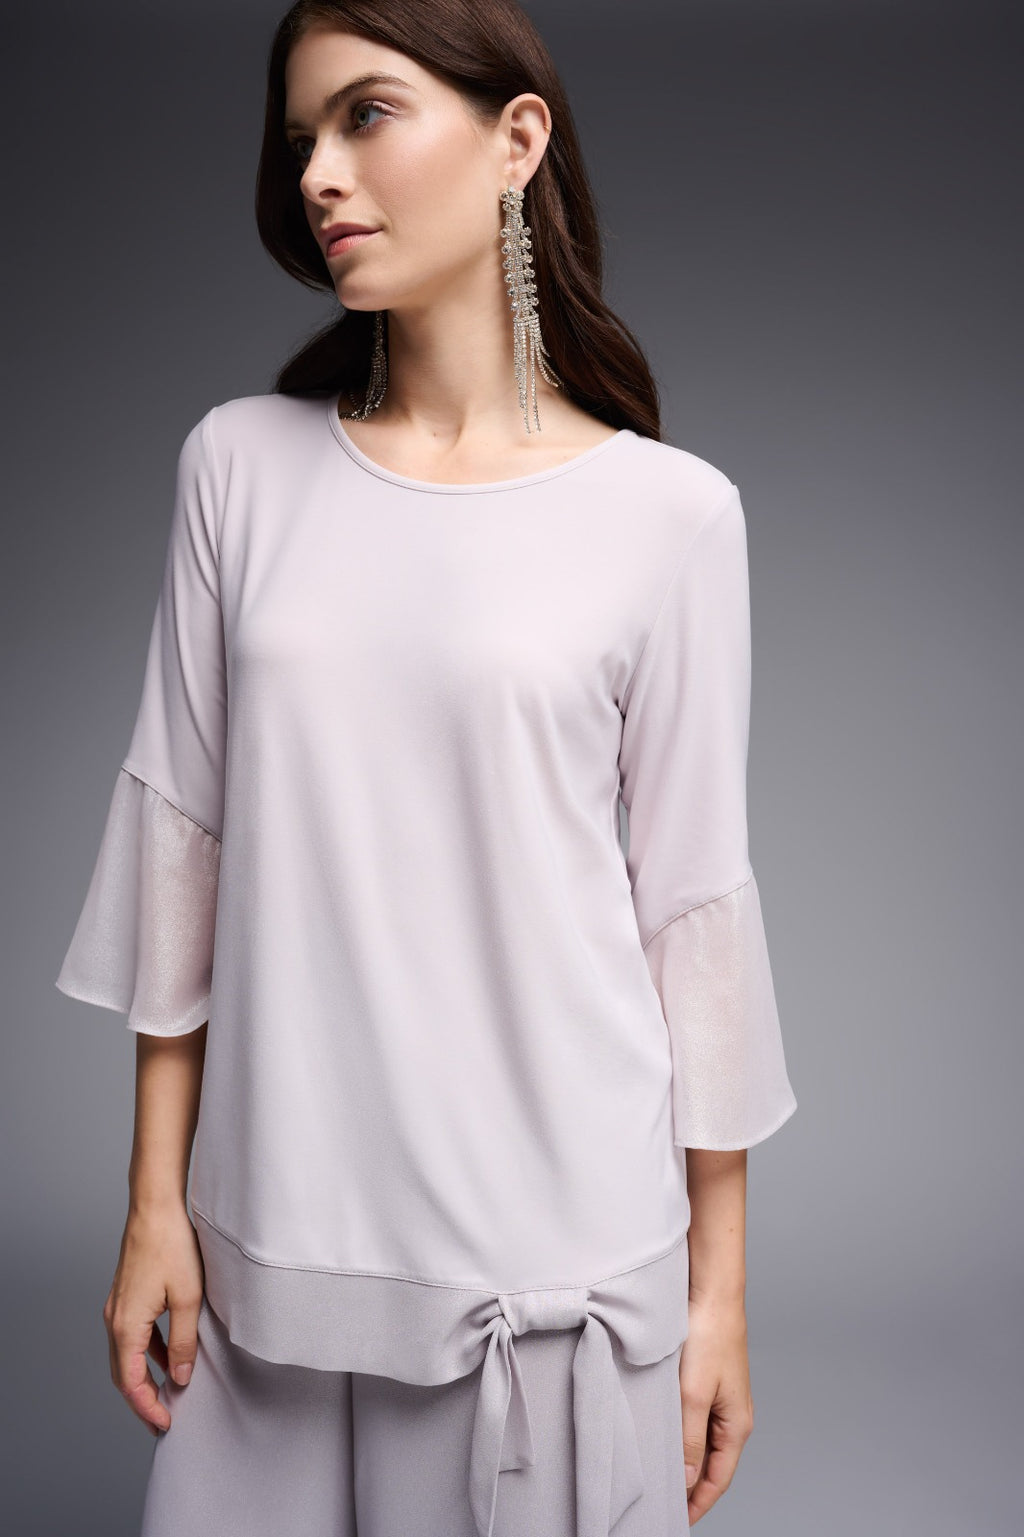 Joseph Ribkoff Mother of Pearl Top Style 231739